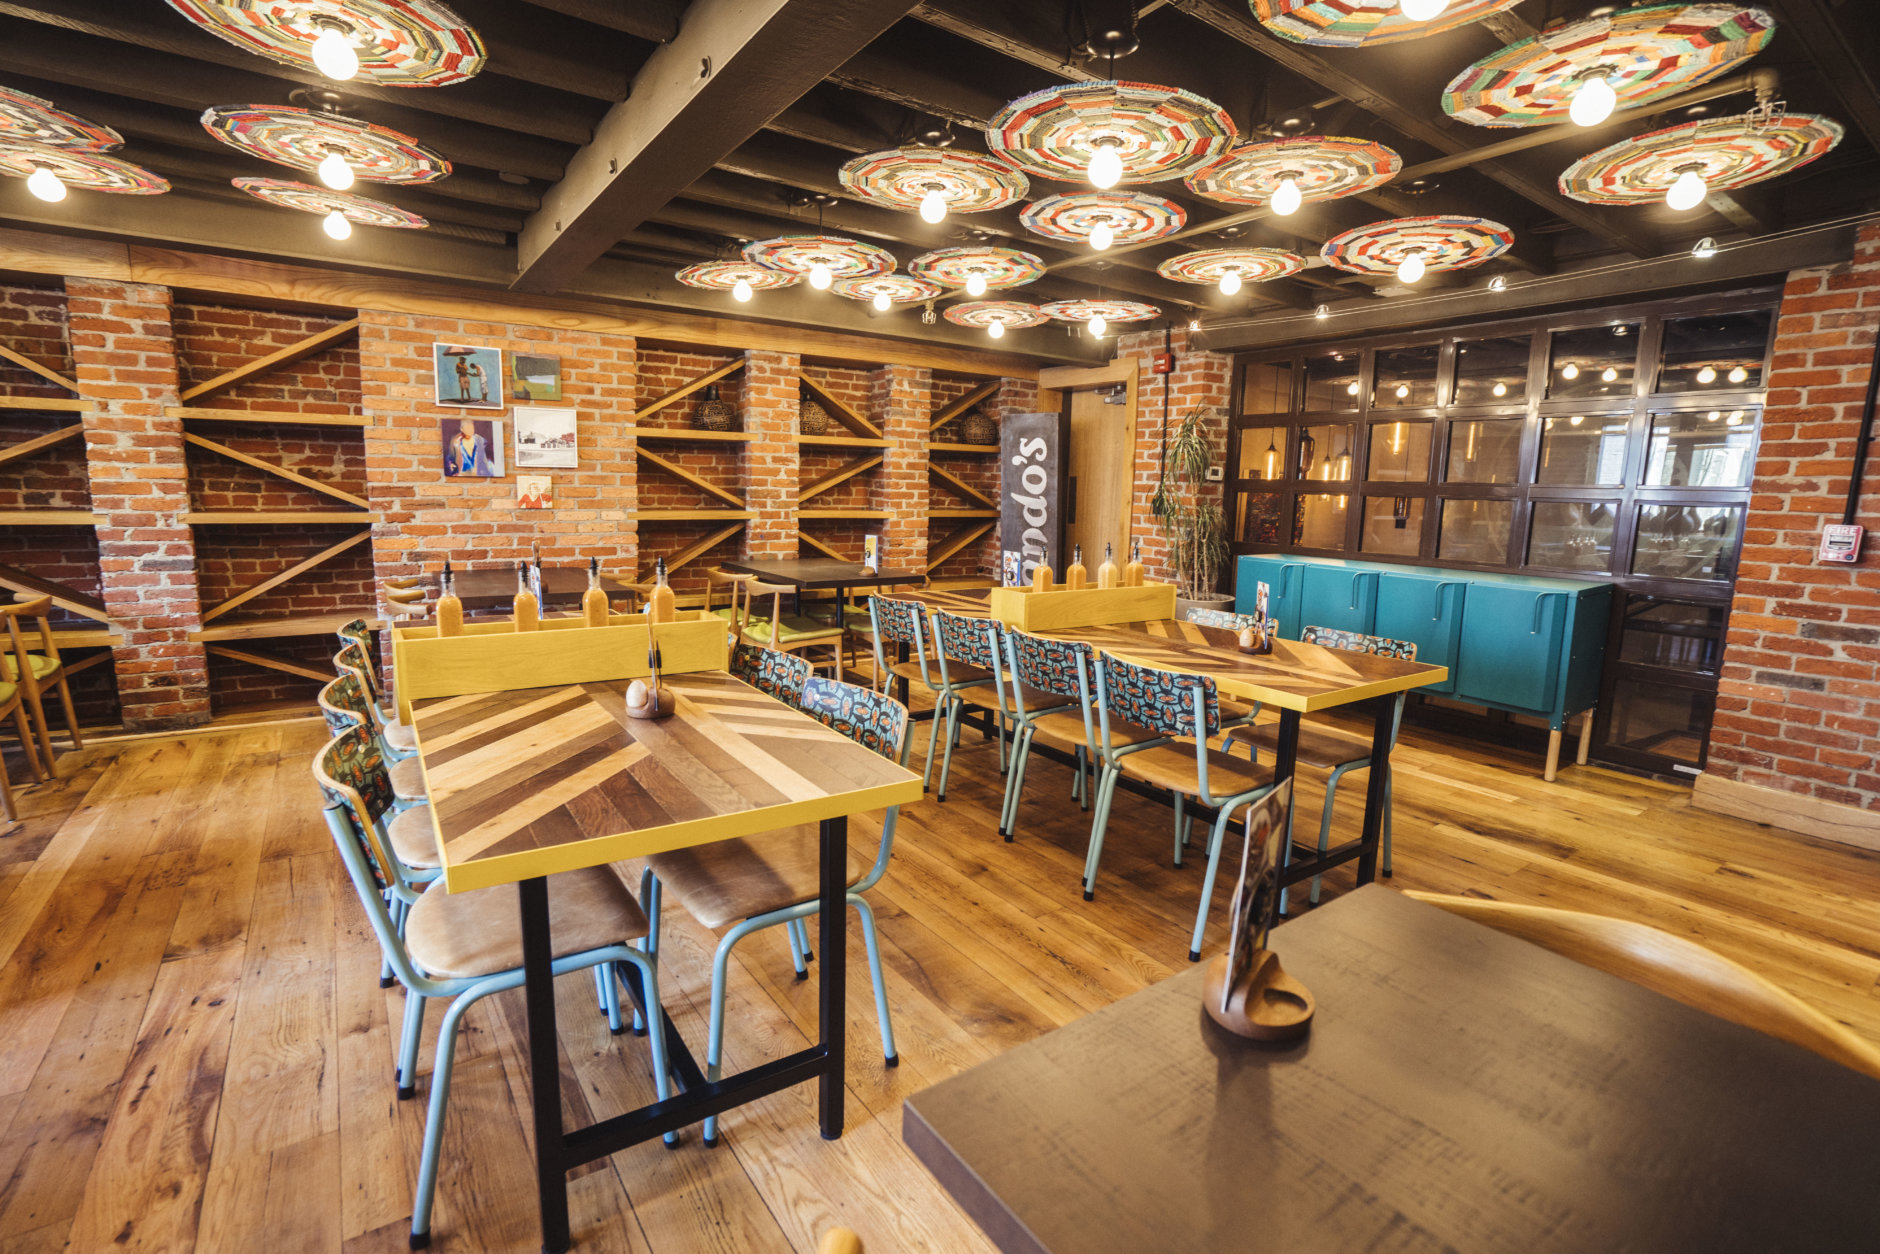 Nando’s Peri-Peri has reopened its Dupont Circle Location February 20 after a two-month renovation, and will hand out free chicken one day next month to mark the reopening. (Courtesy Nando's Peri-Peri)